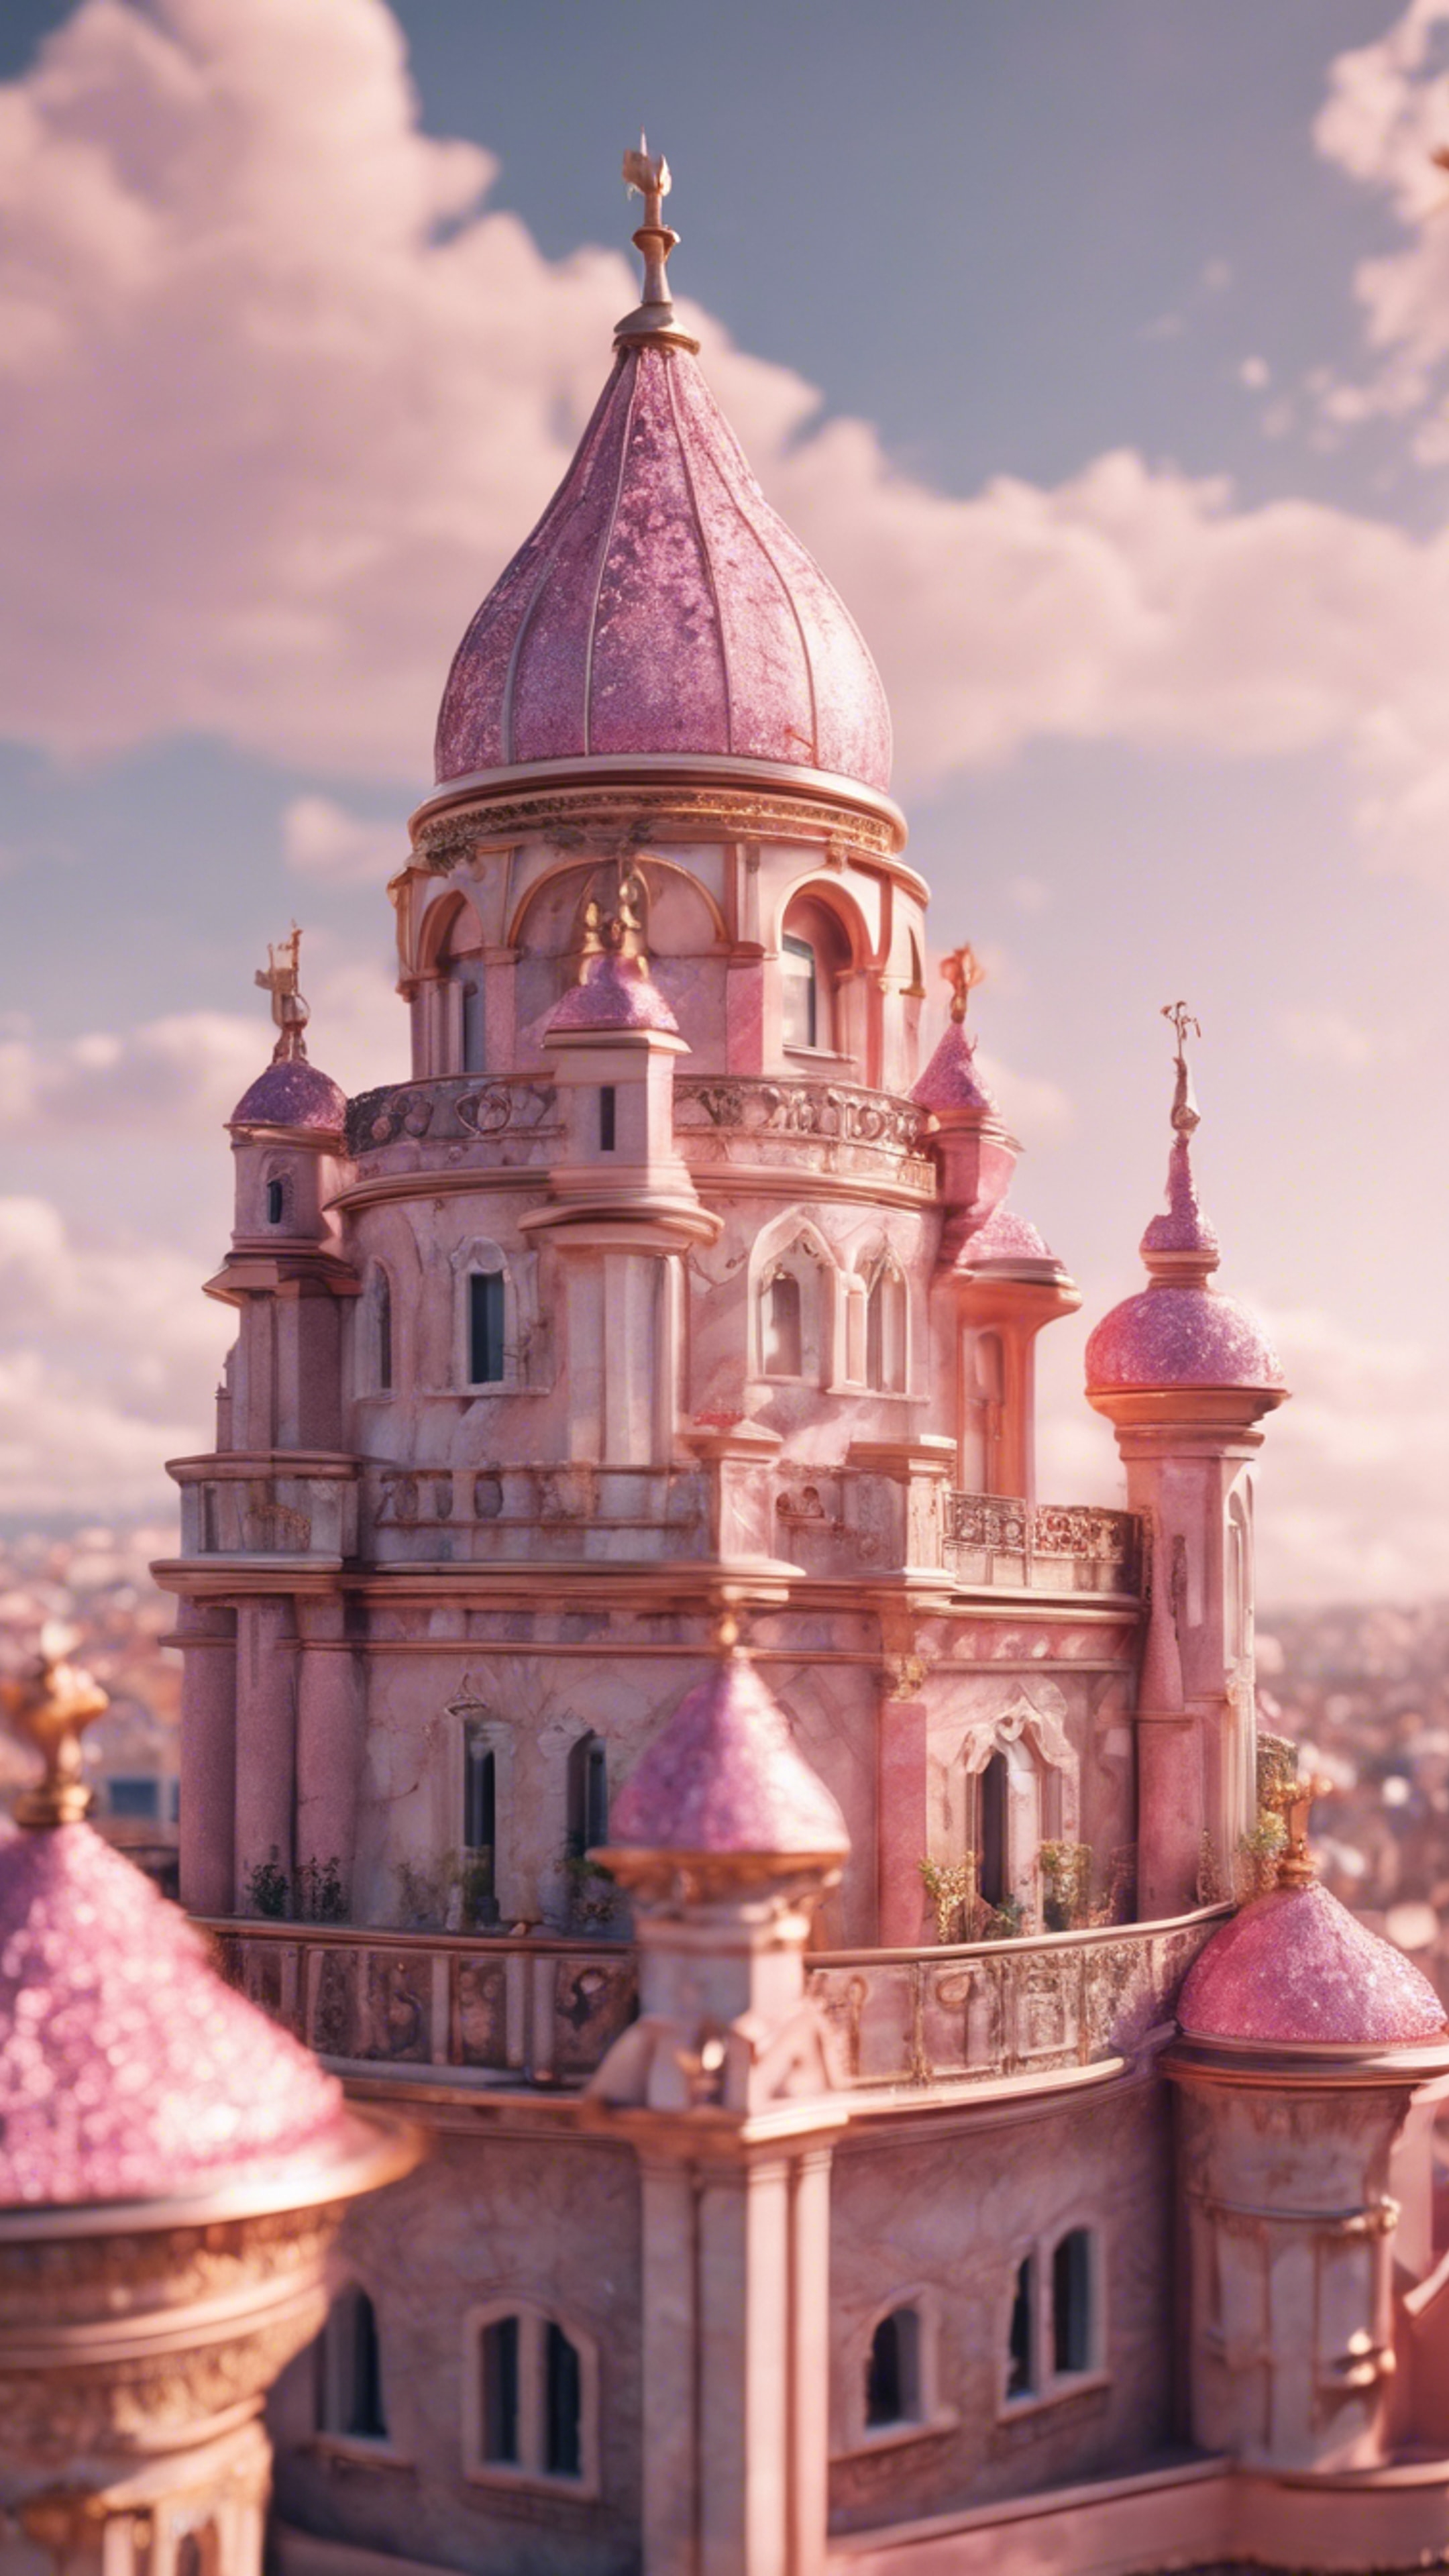 An ornate pink marble castle with glimmering golden rooftops during a sunny afternoon. ផ្ទាំង​រូបភាព[39cdf807c12f4b9c8dd2]